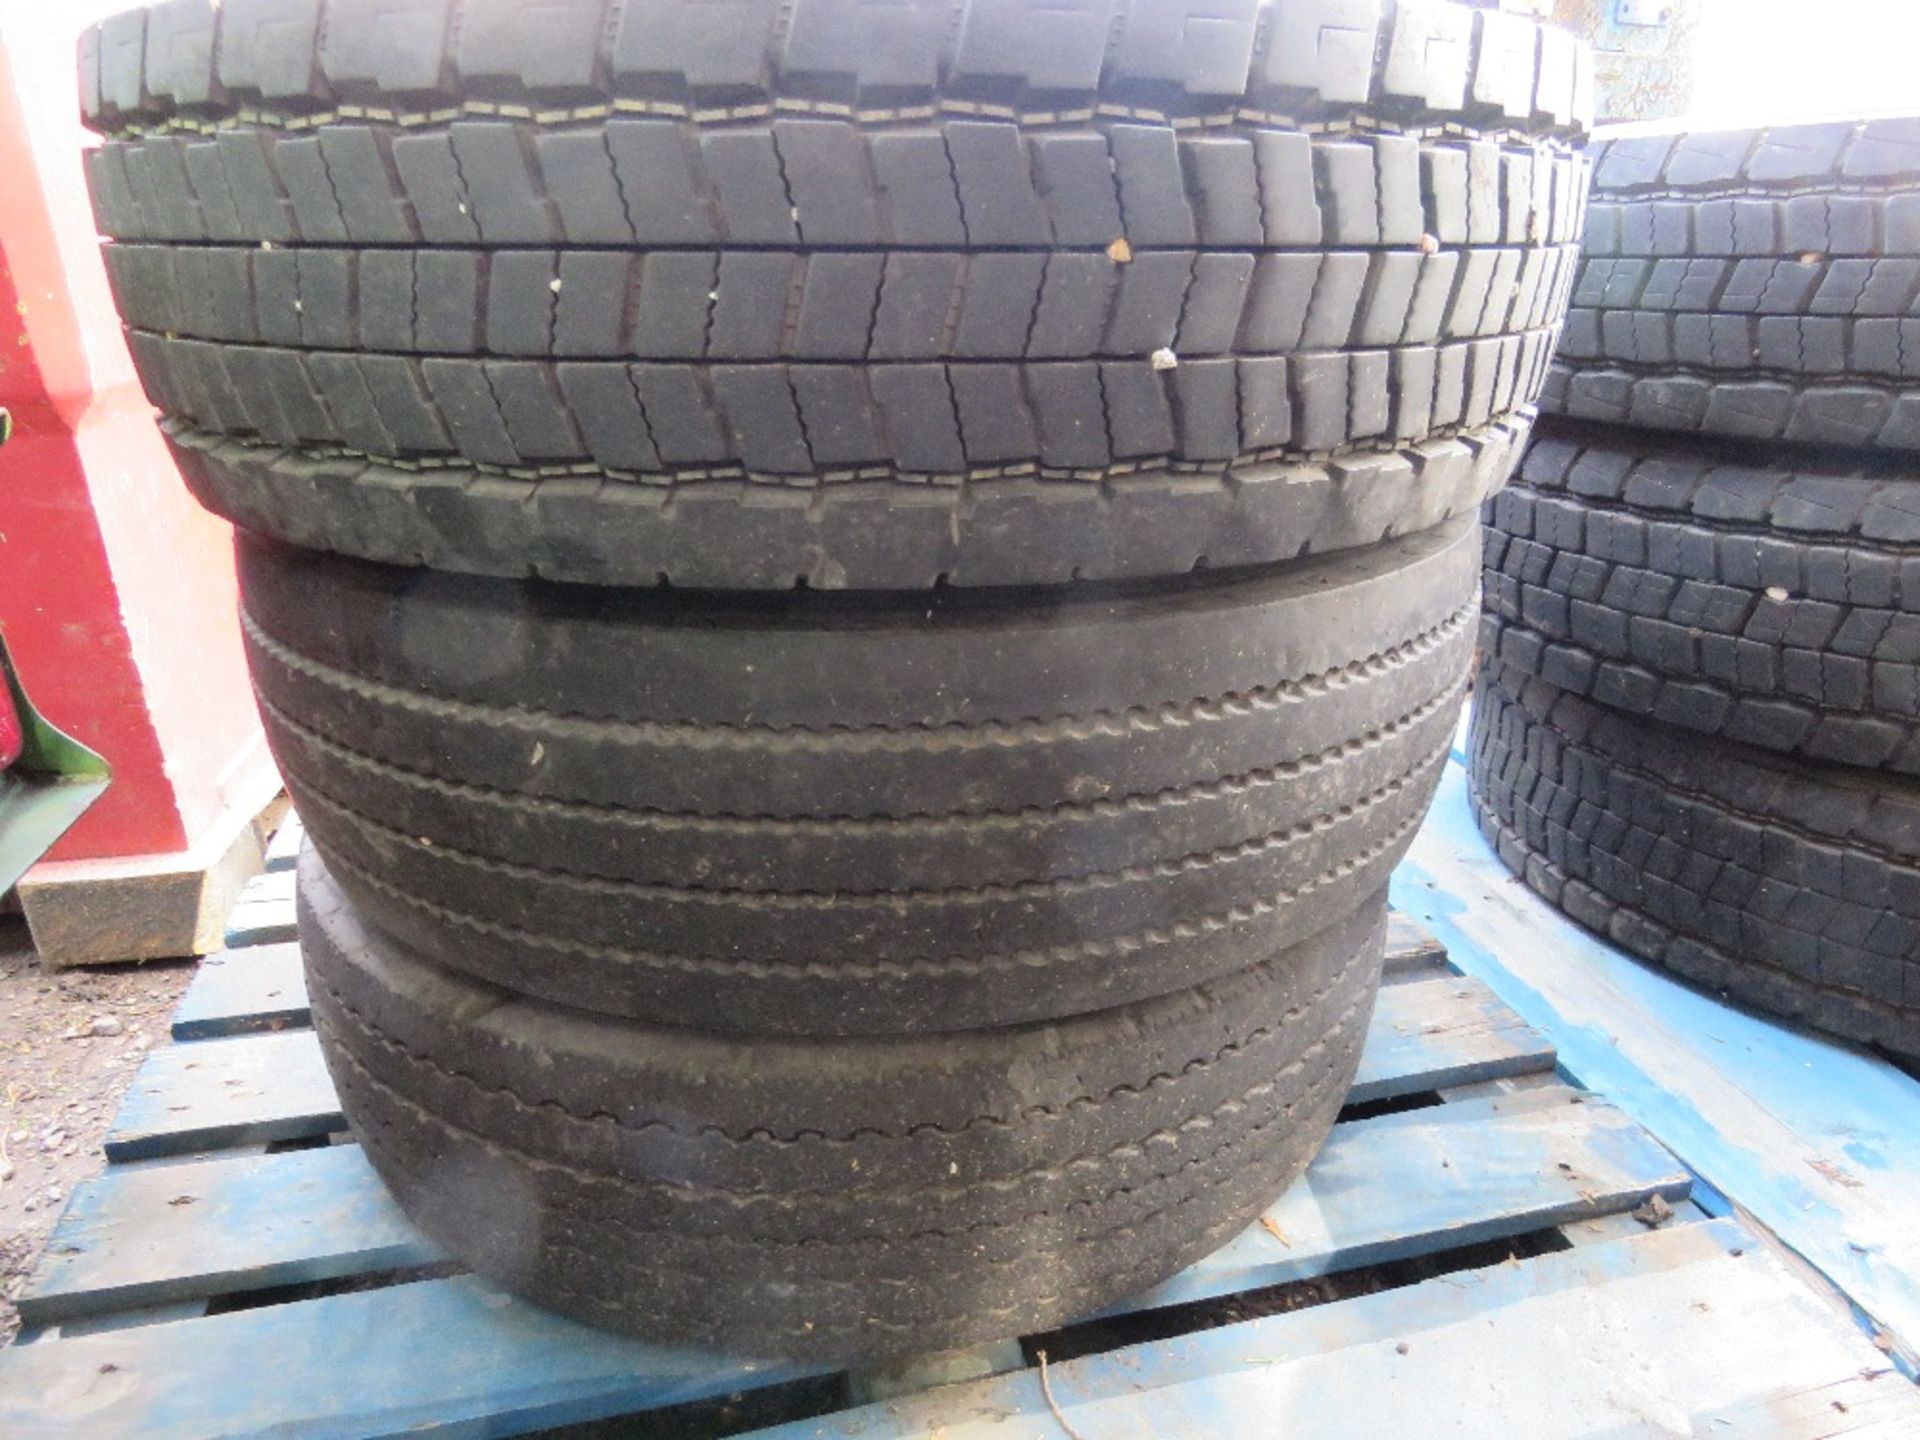 6NO 6 STUD LORRY WHEELS & TYRES 215/75-R17.5. - Image 2 of 6